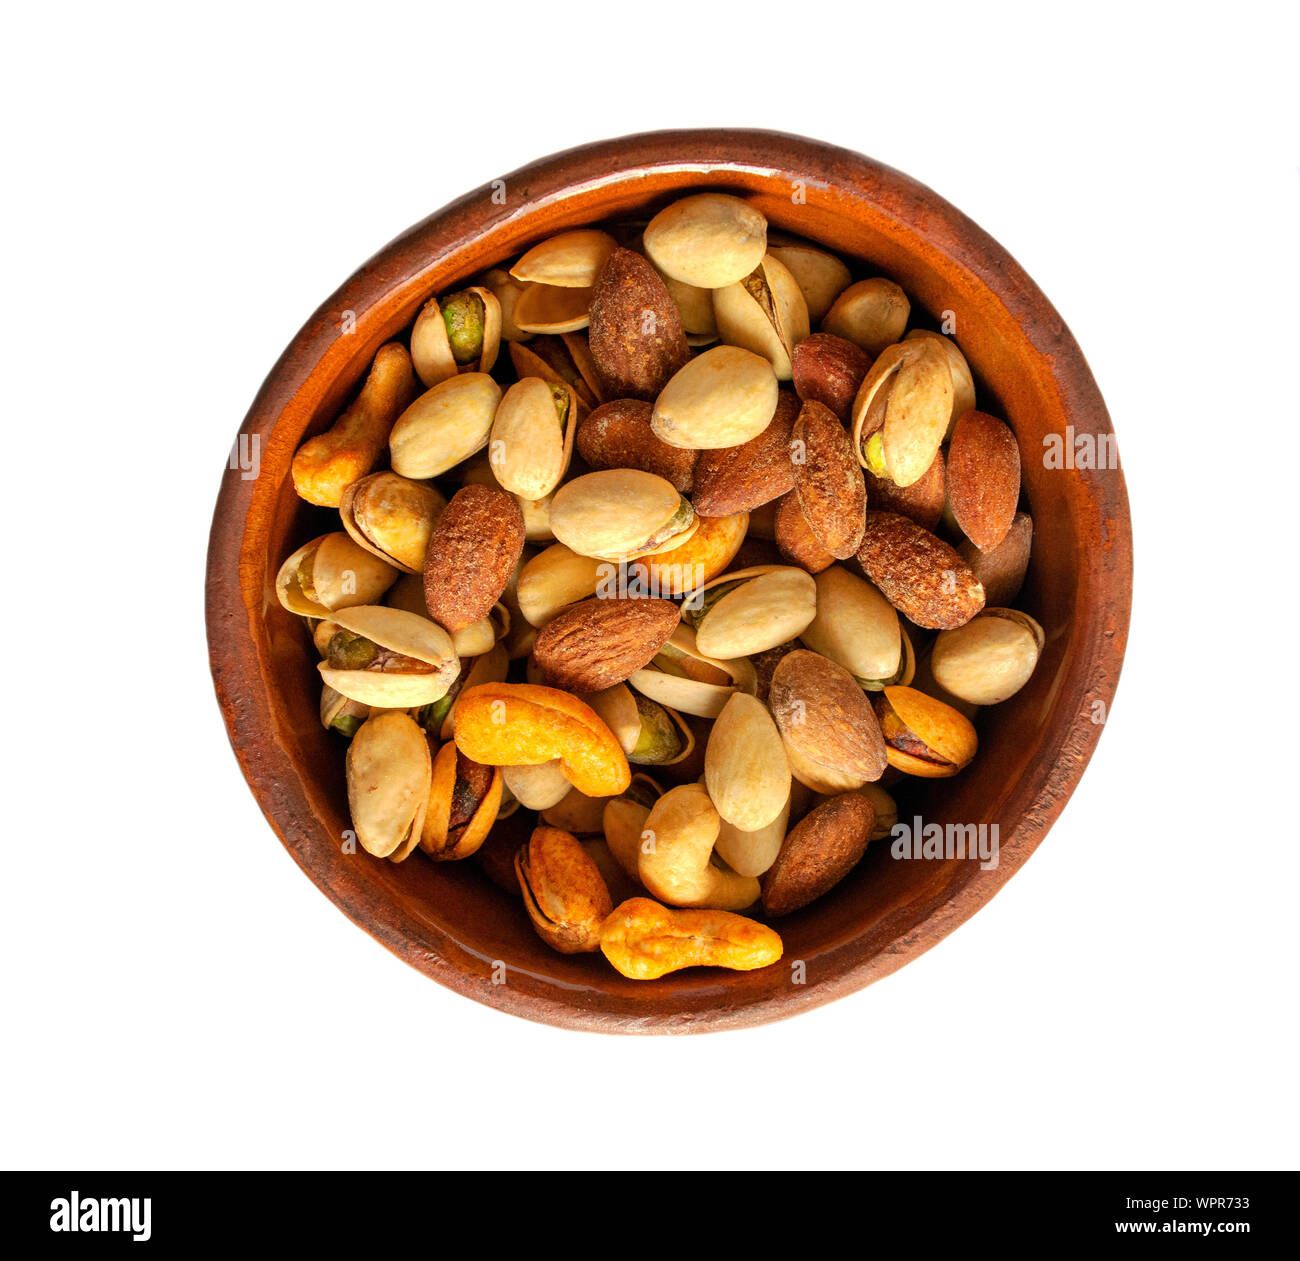 Mixed nuts in a brown ceramic bowl isolated on white background. Healthy snack and food. Salted and spicy pistachios, cashew and almond. Top view. Stock Photo